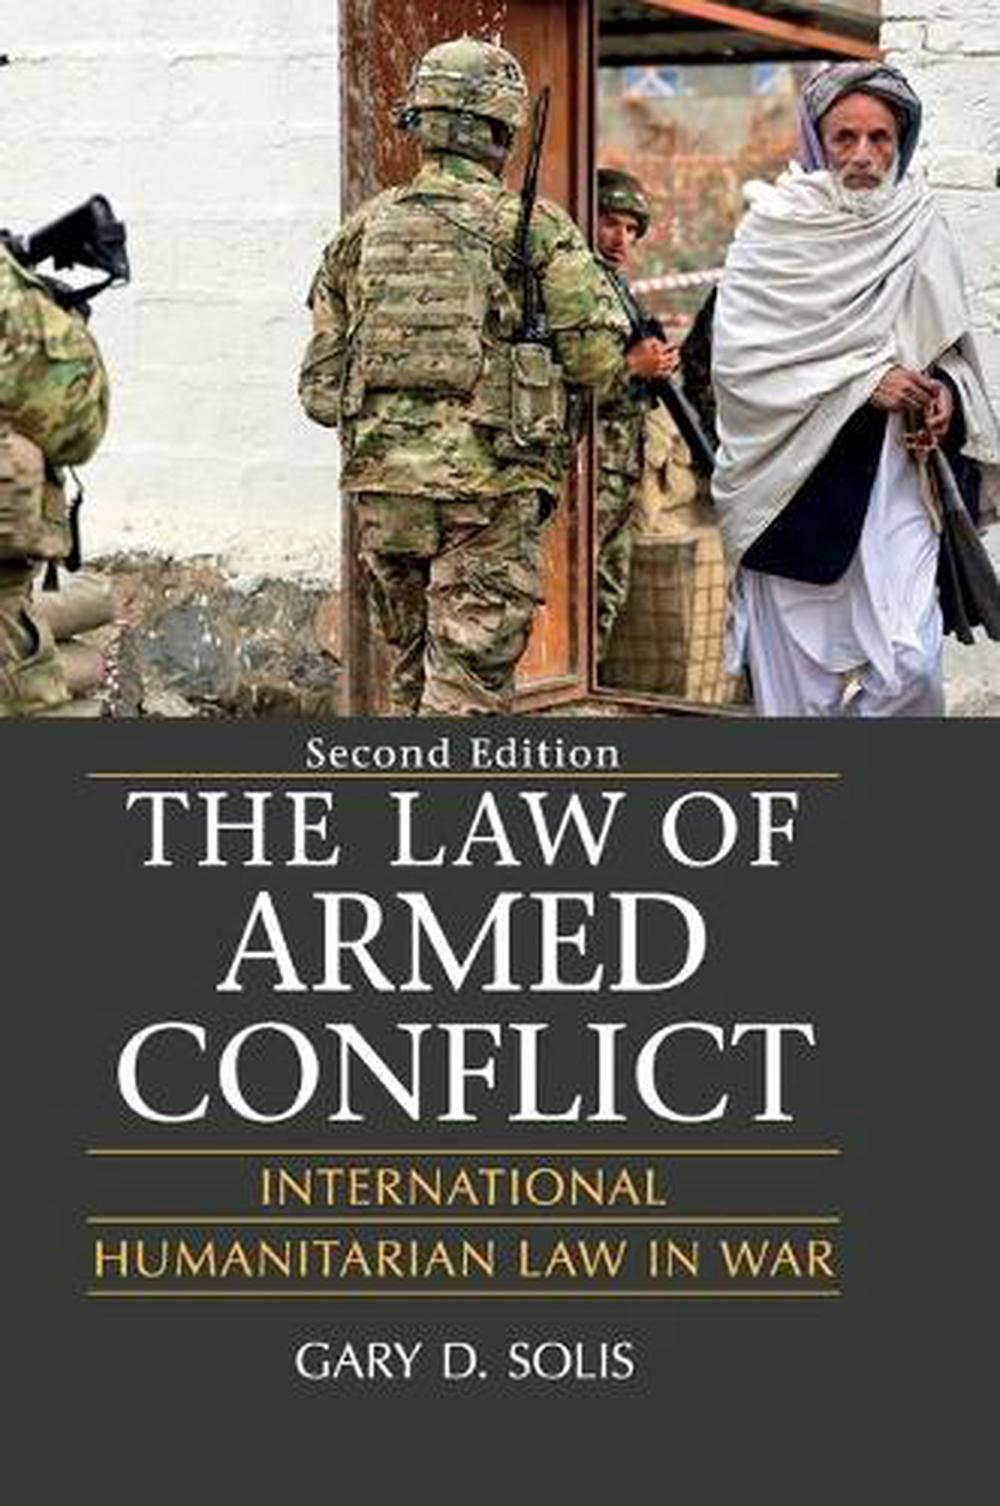 what is the major cause of armed conflict